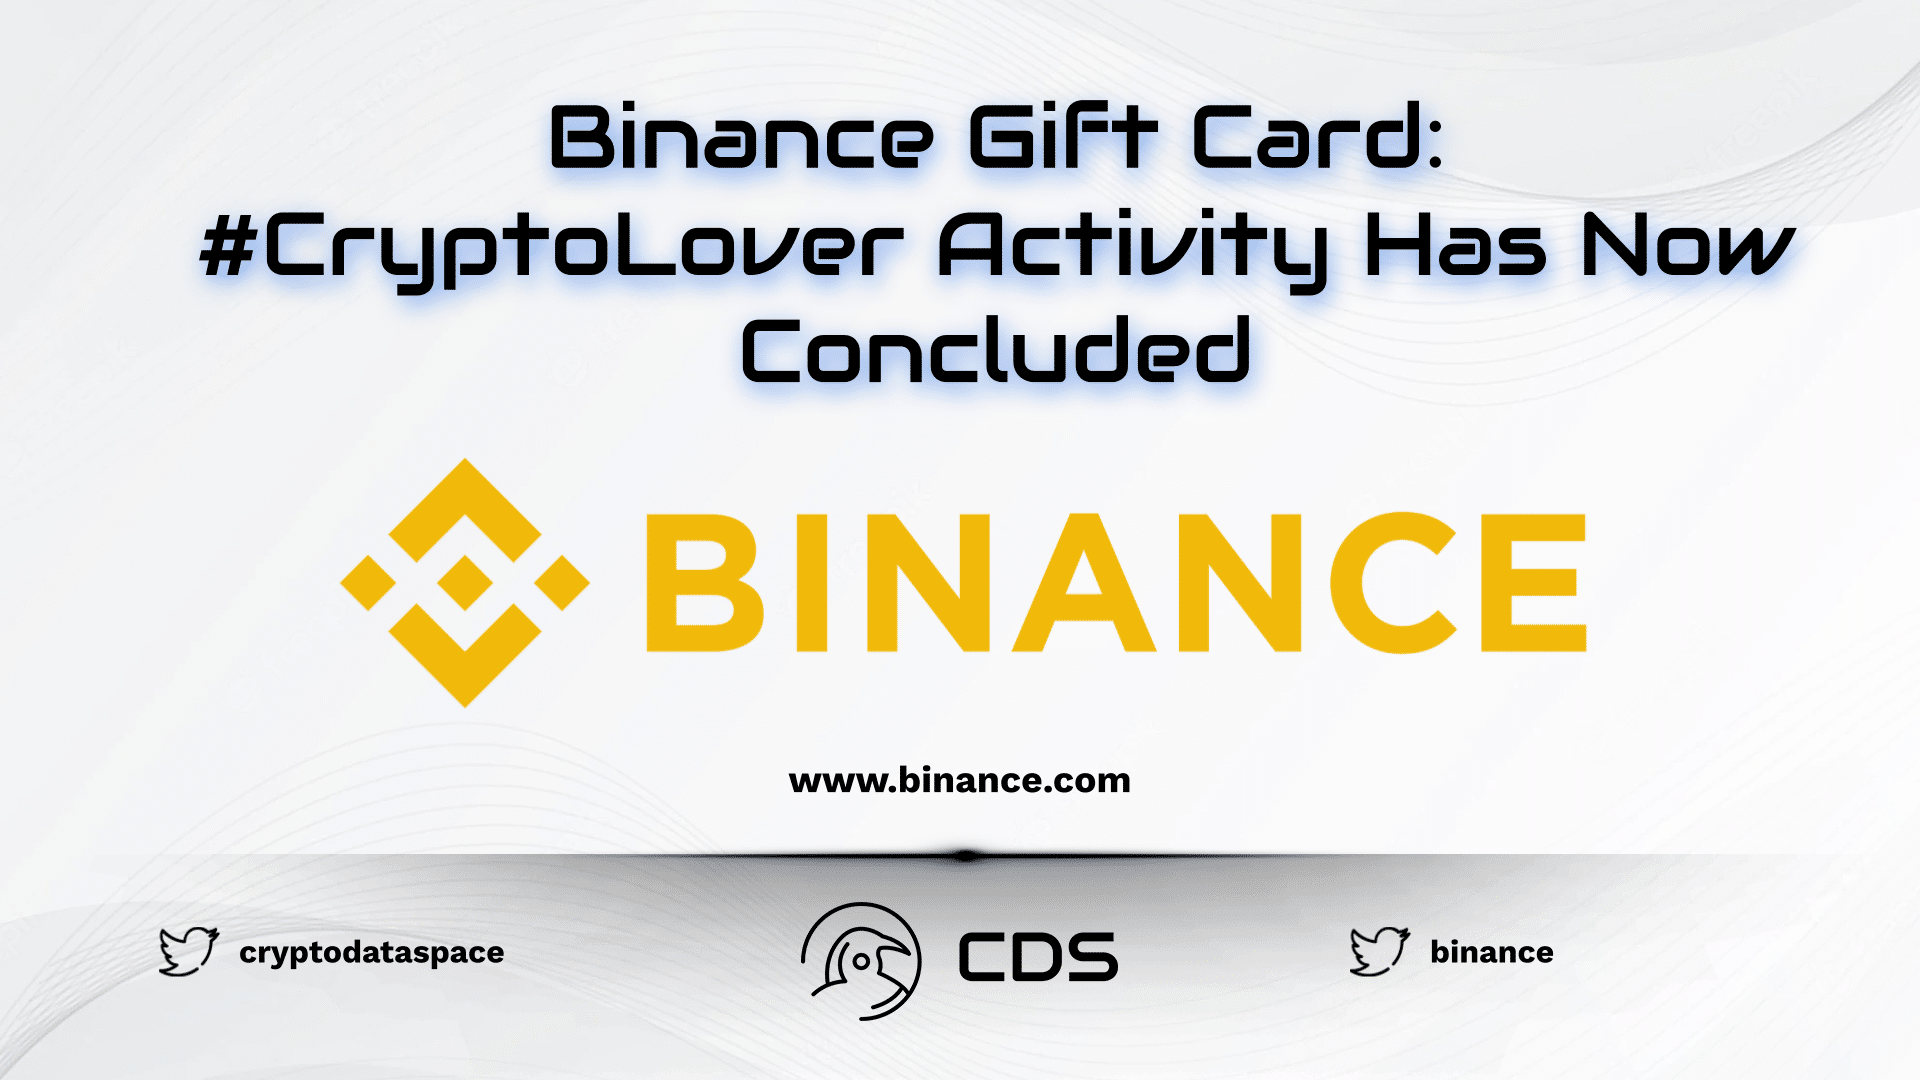 Binance Gift Card #CryptoLover Activity Has Now Concluded